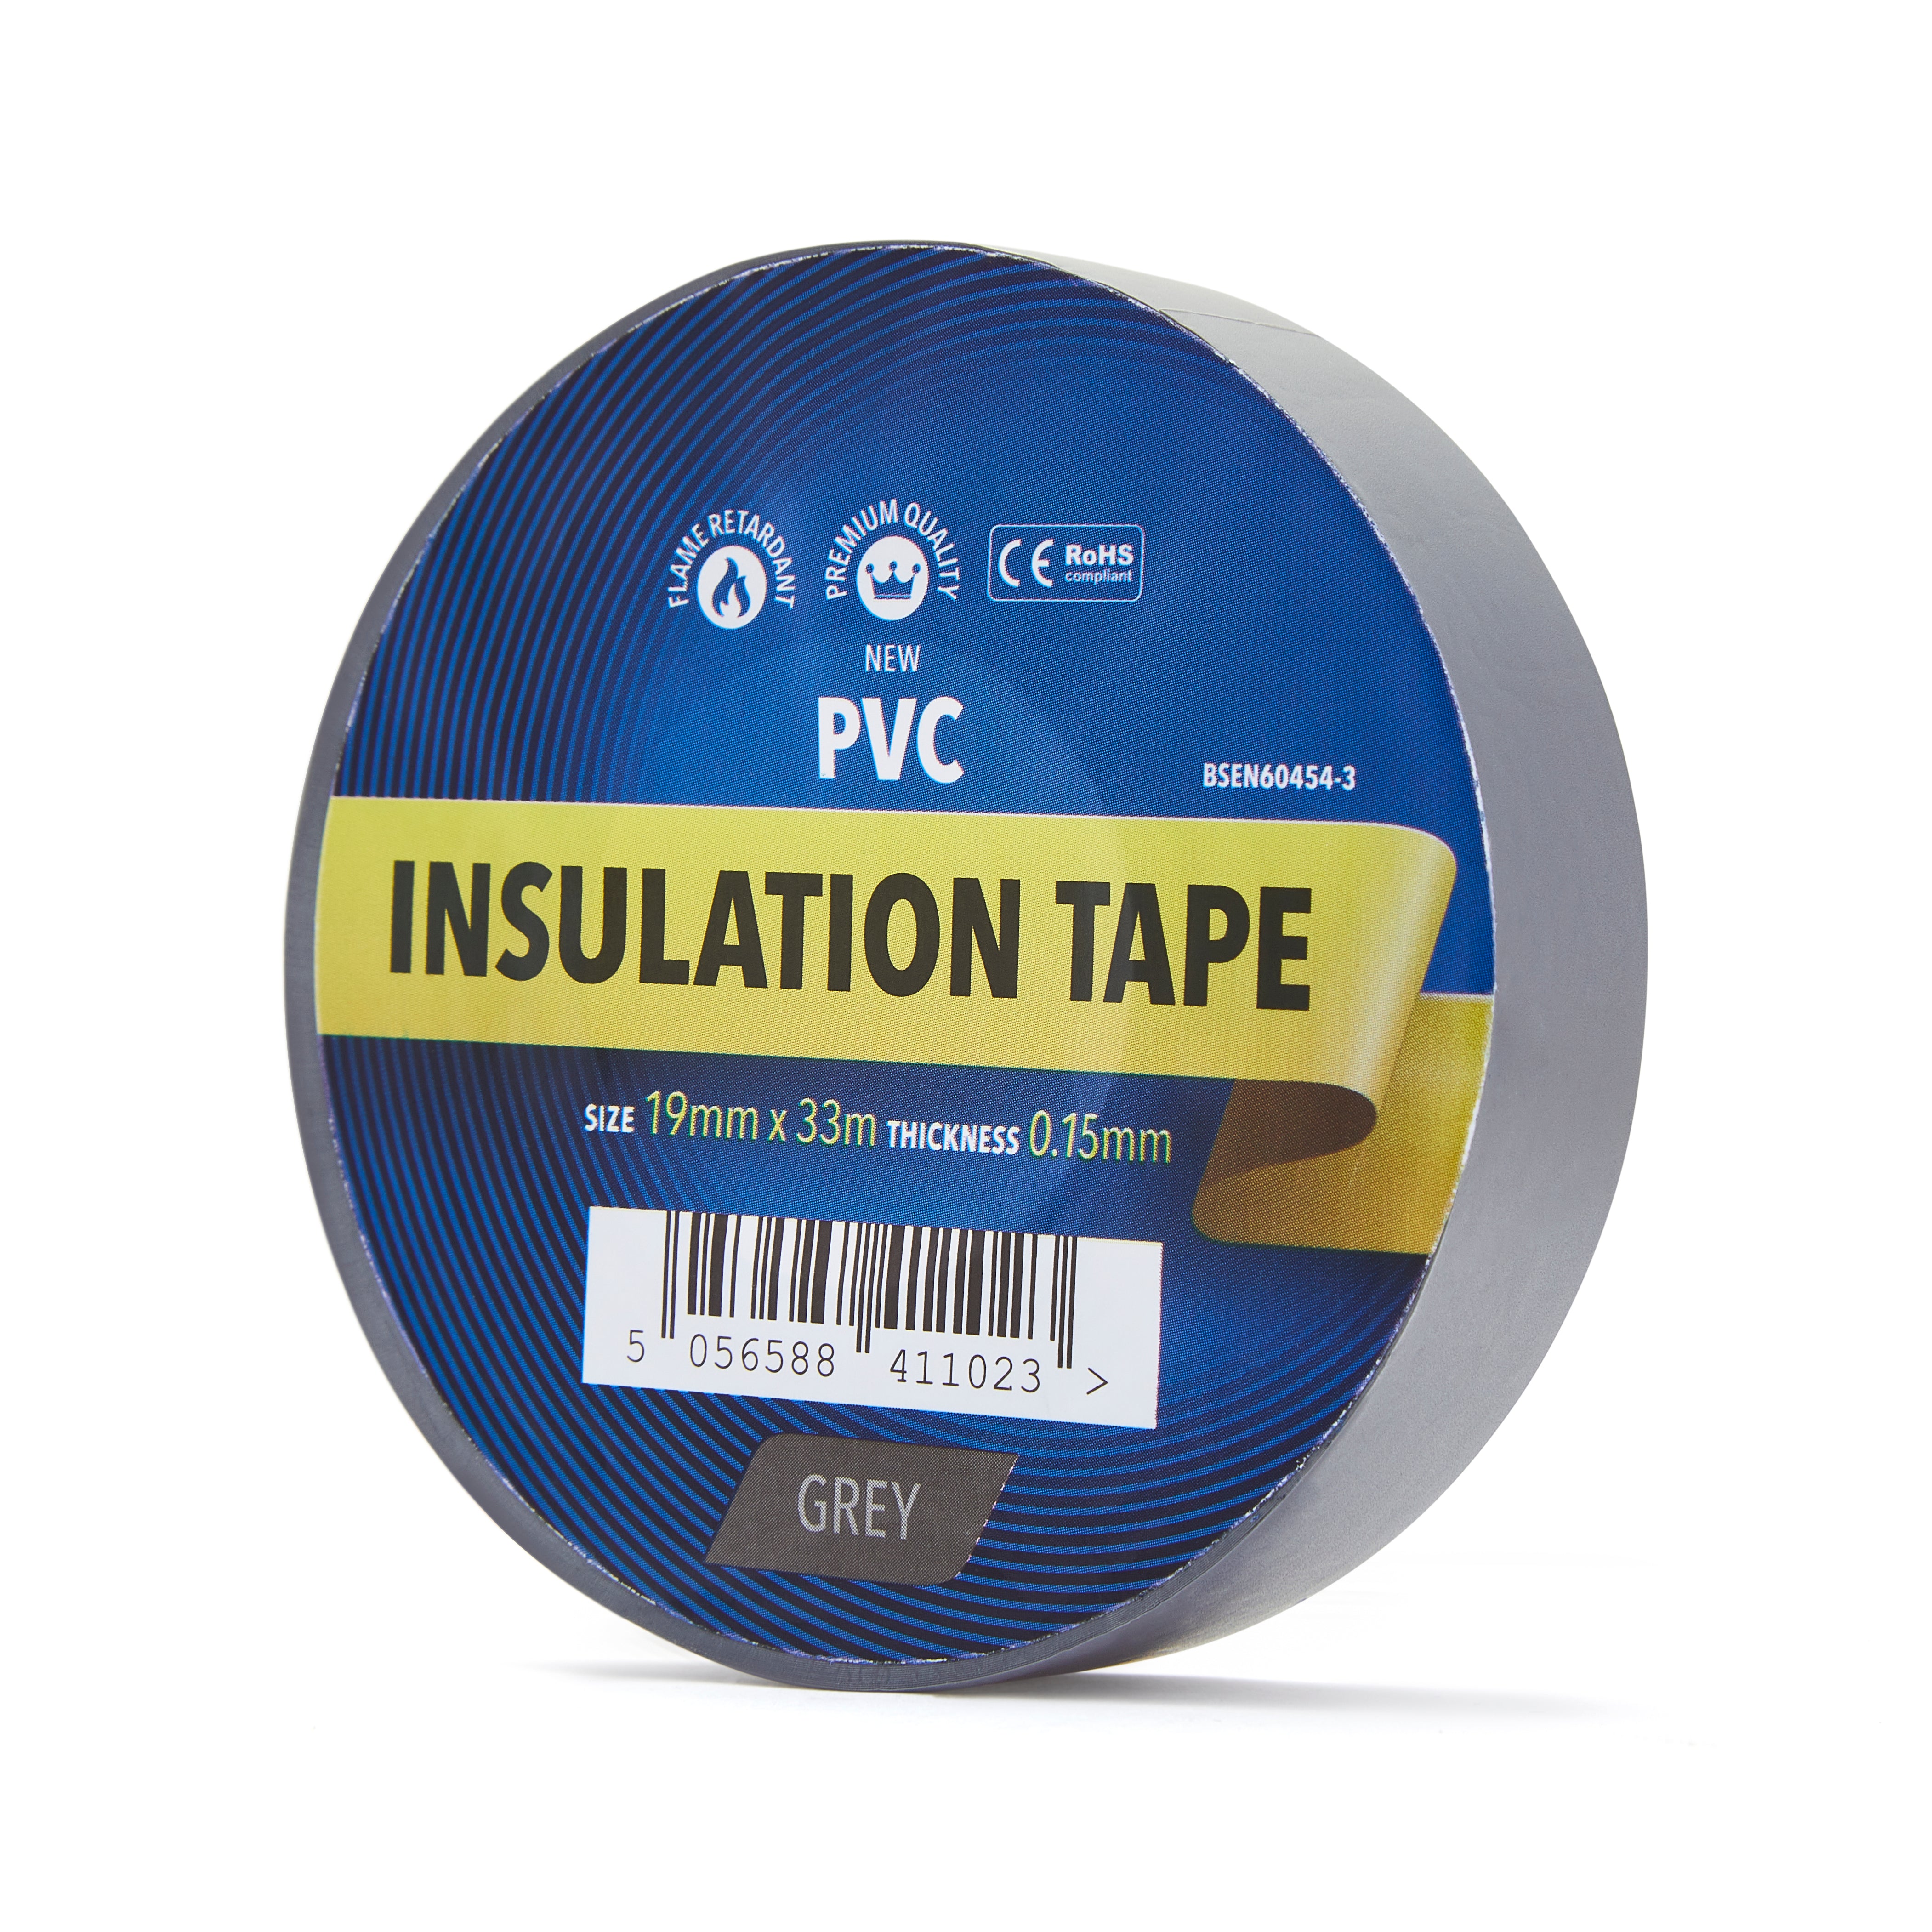 Grey Electrical Tape 19mm - PVC Insulation Tape